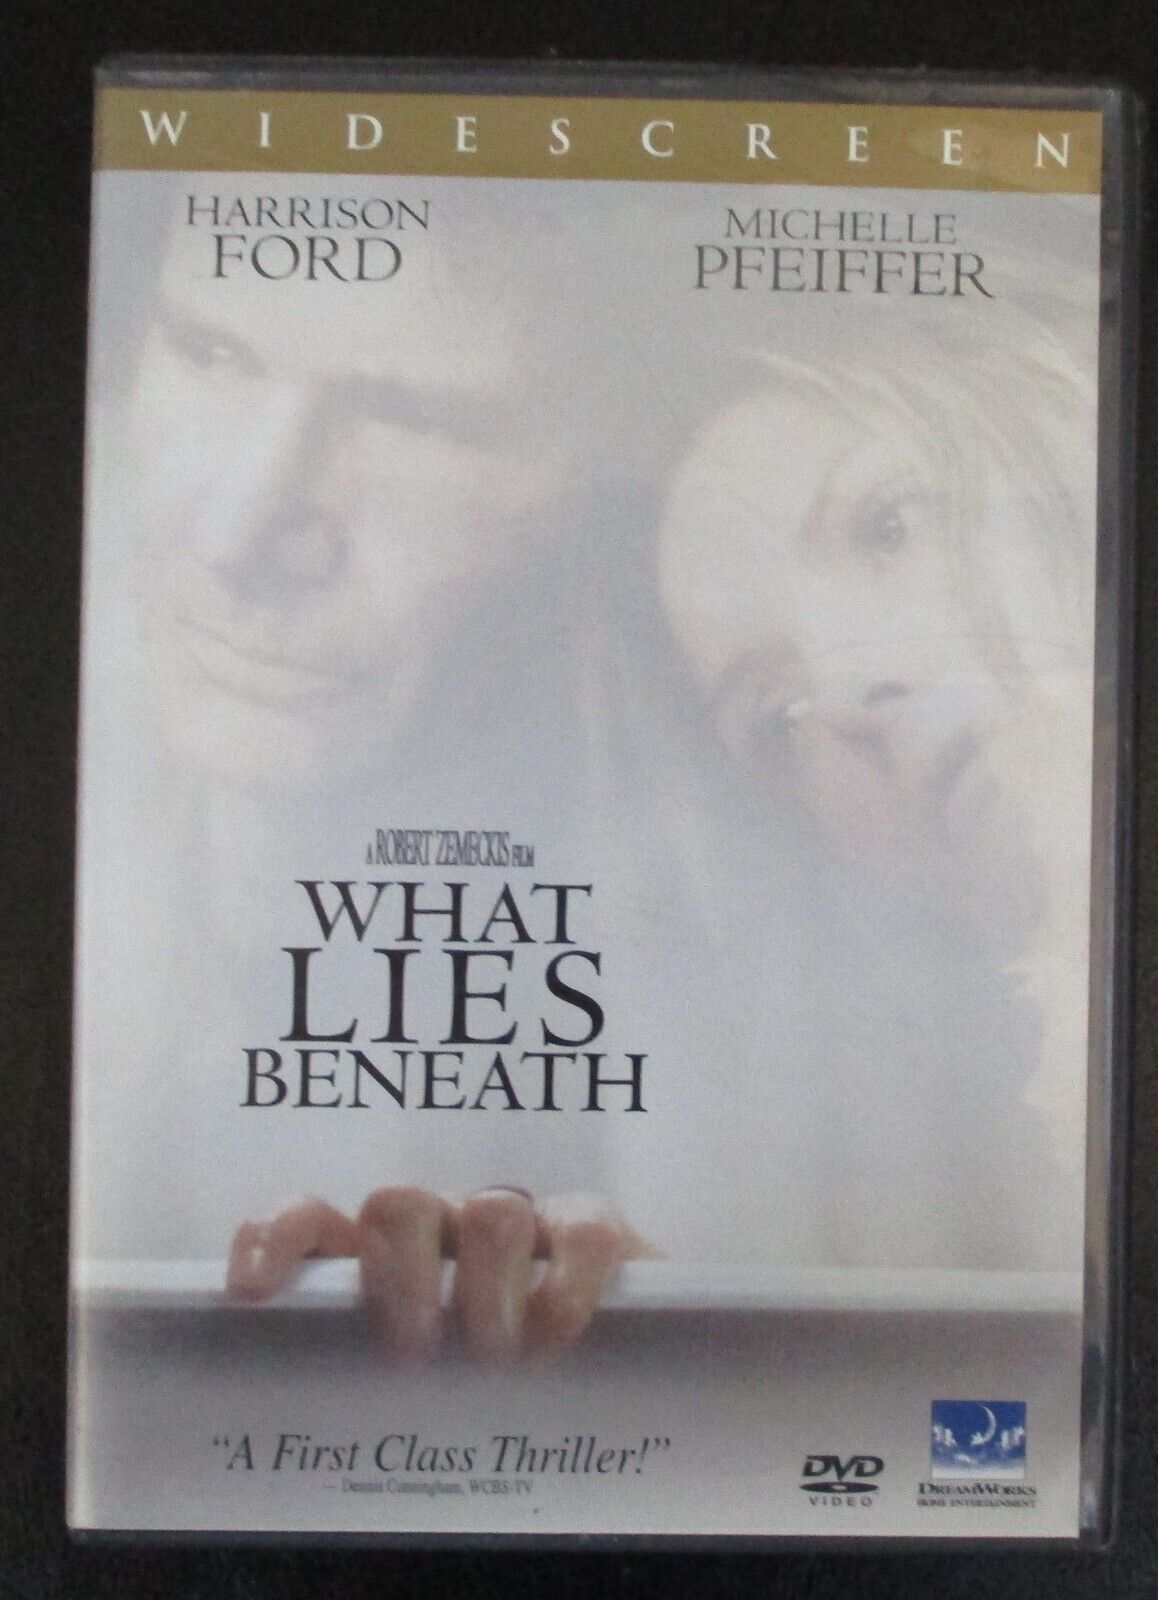 Primary image for What Lies Beneath (DVD, 2000)  Very Good